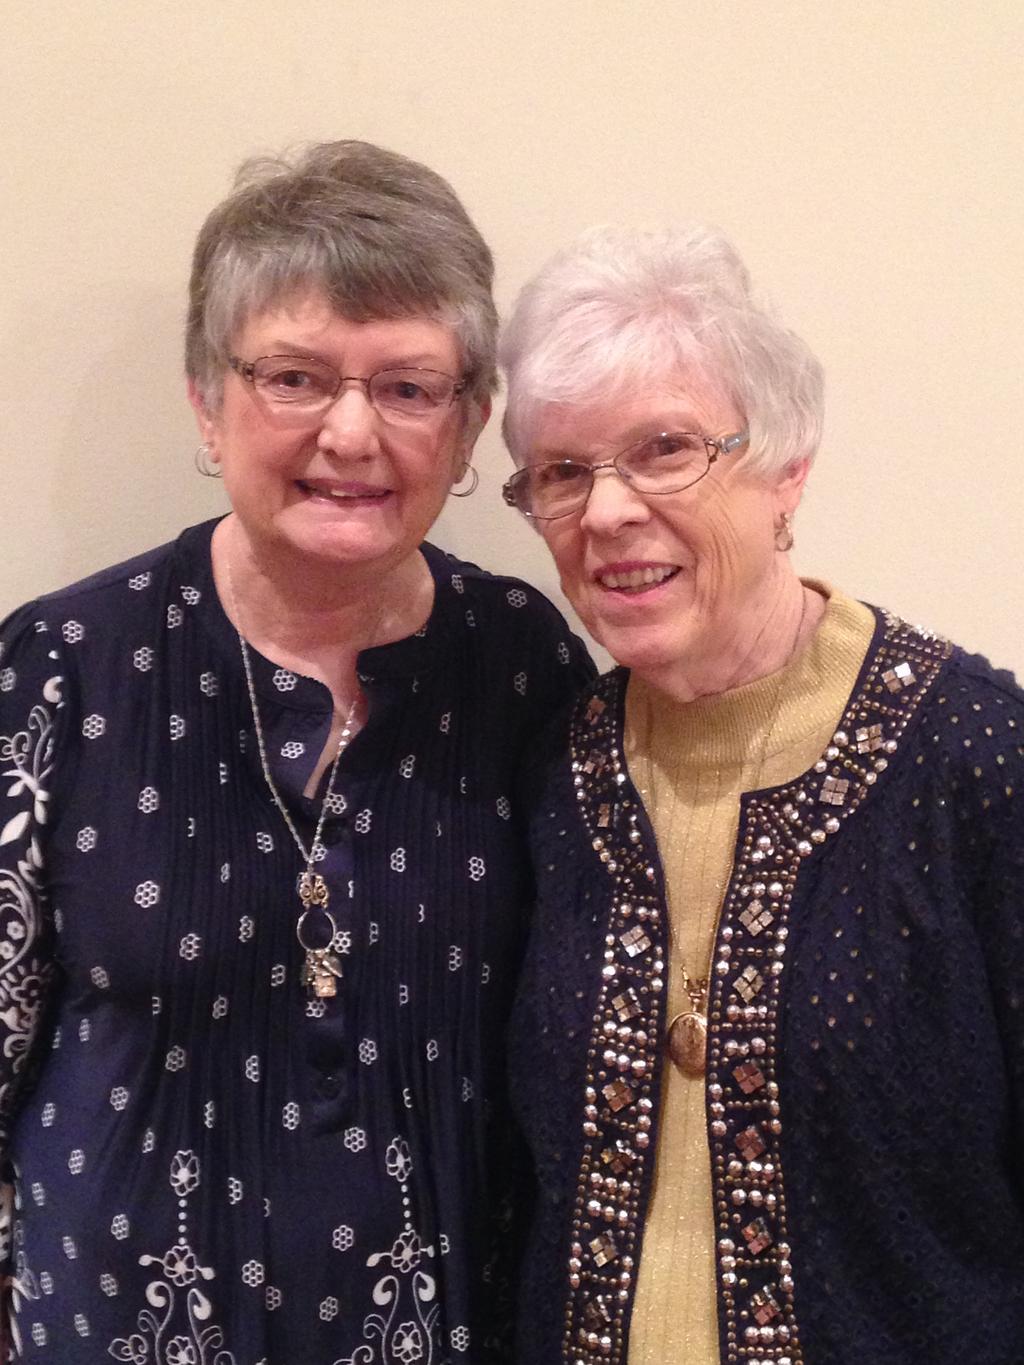 Double Feature Spot- Light Lois Nelson and Linda Dasovic Linda Dasovic How many years have you been at FaithWestwood? I have been at Faith Westwood for 41 years.